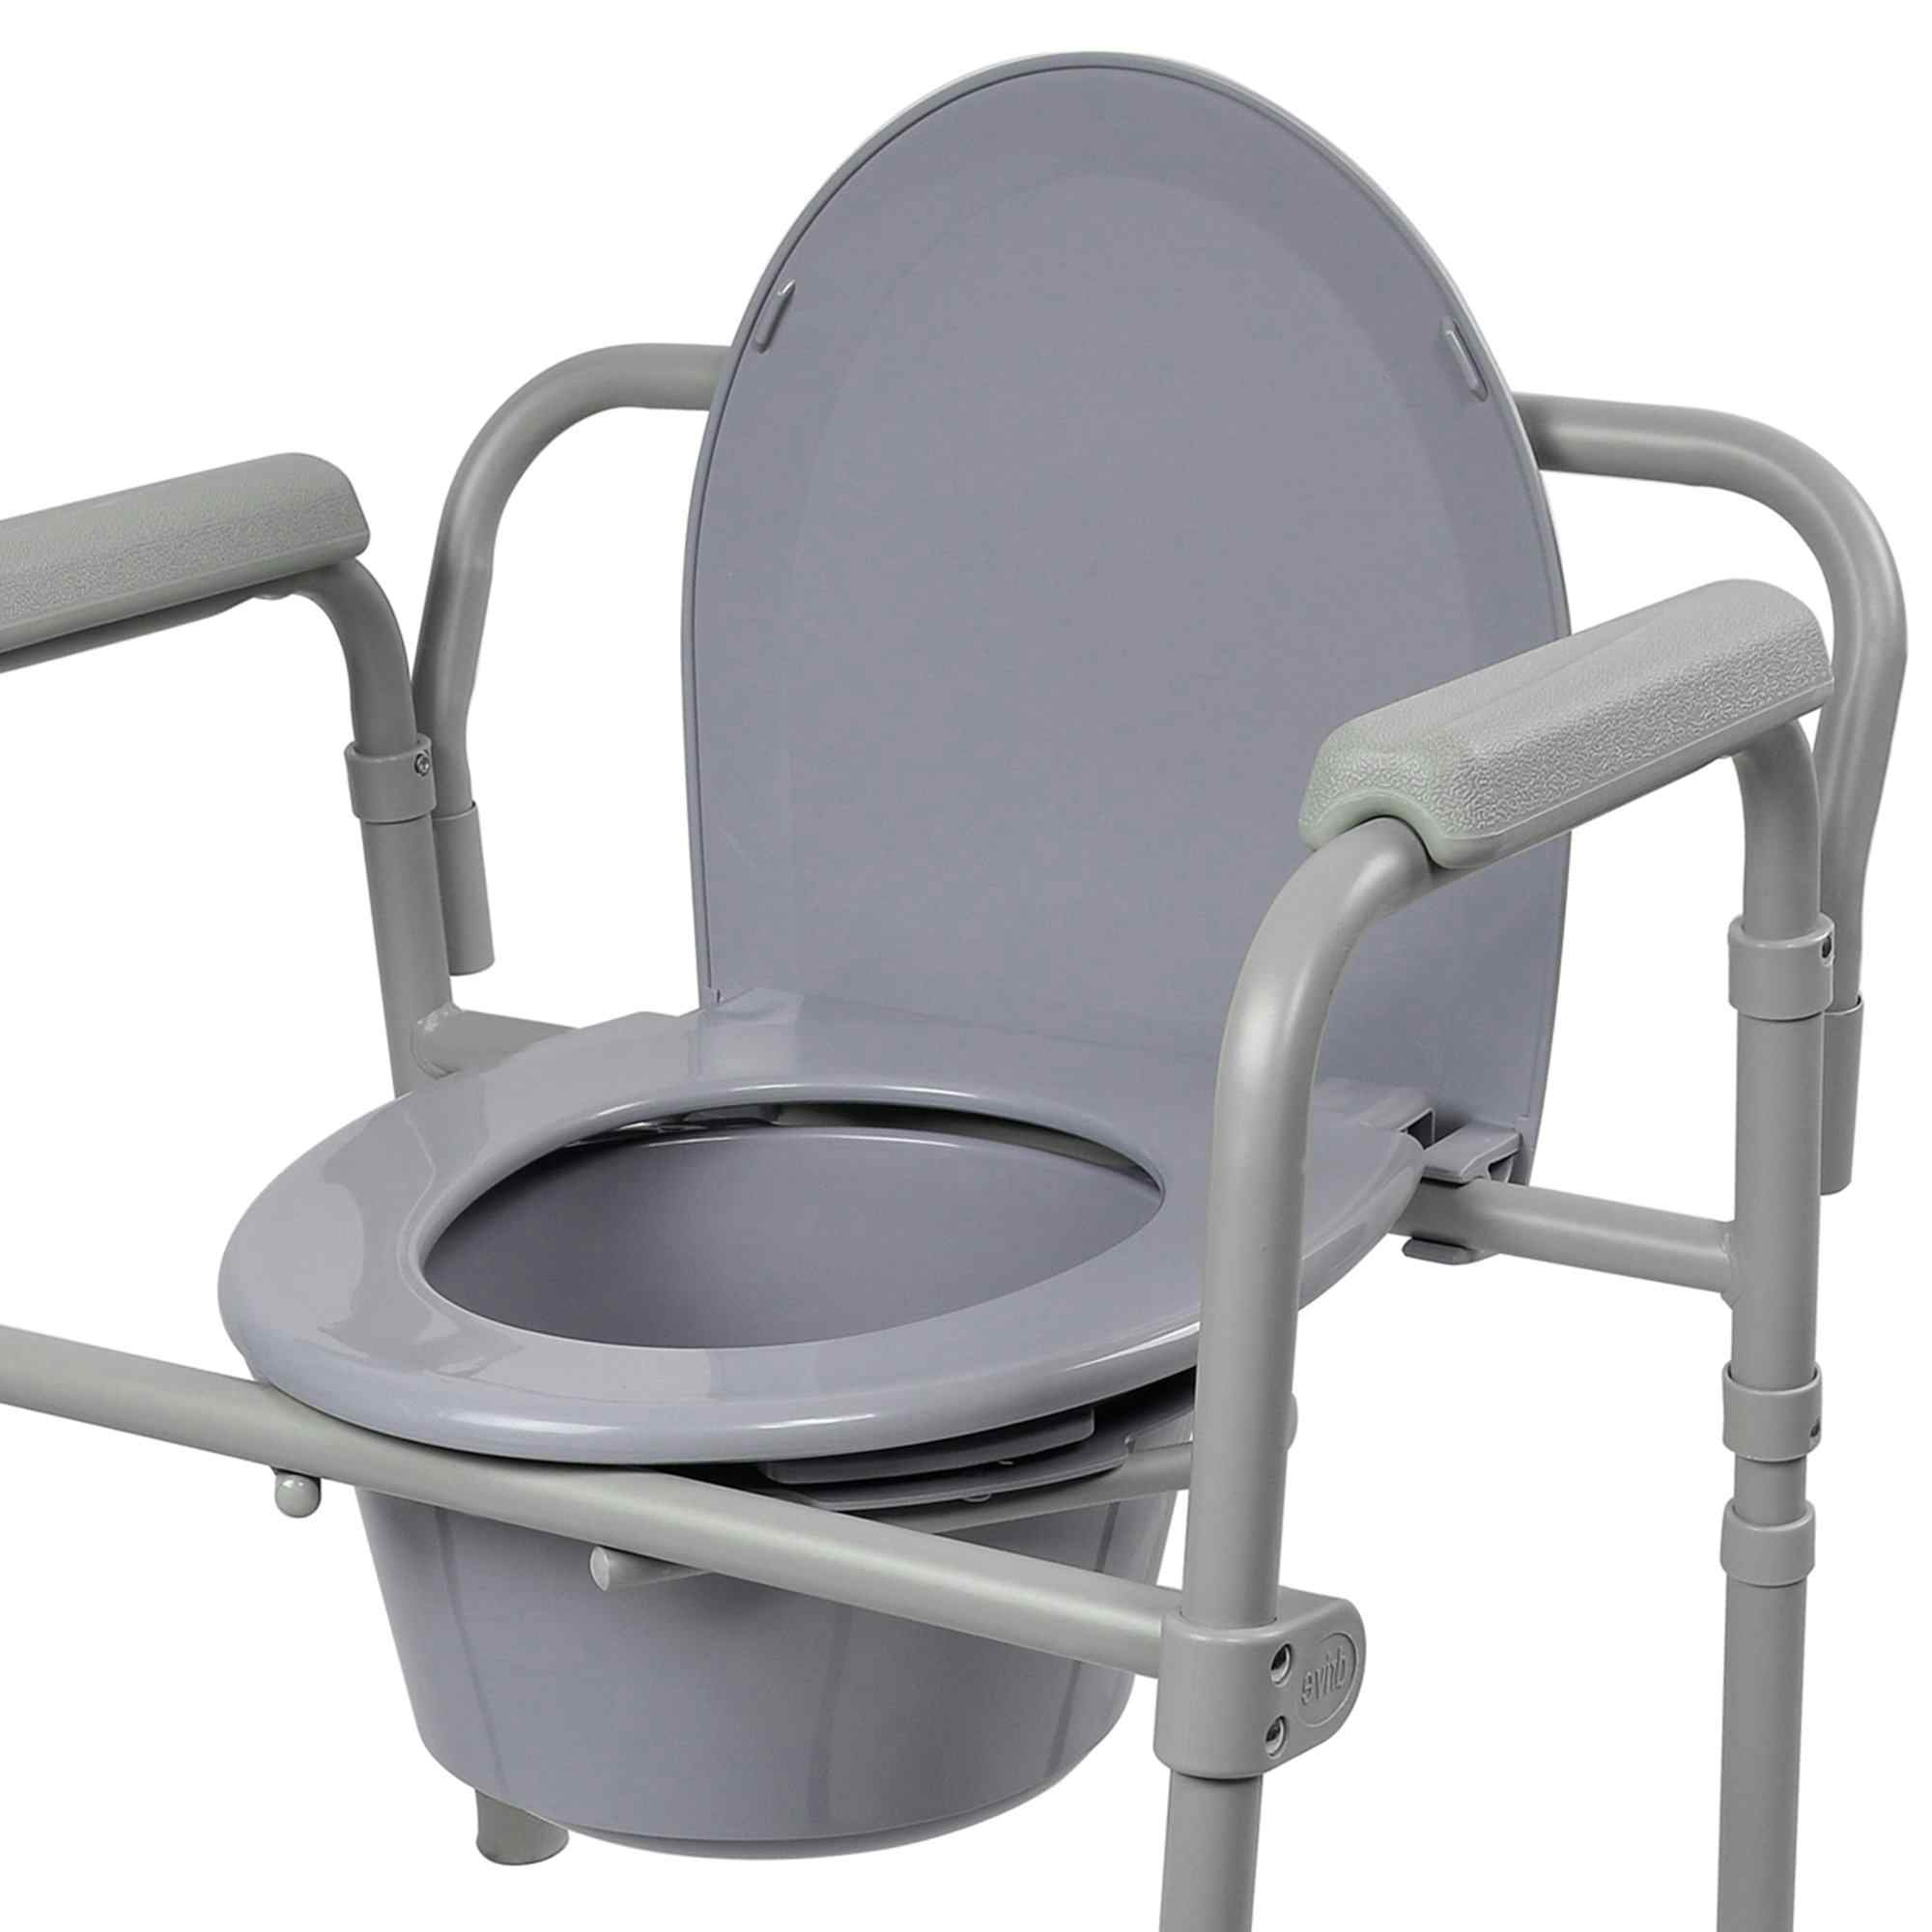 Image of McKesson Commode Chair with Fixed Arm product right